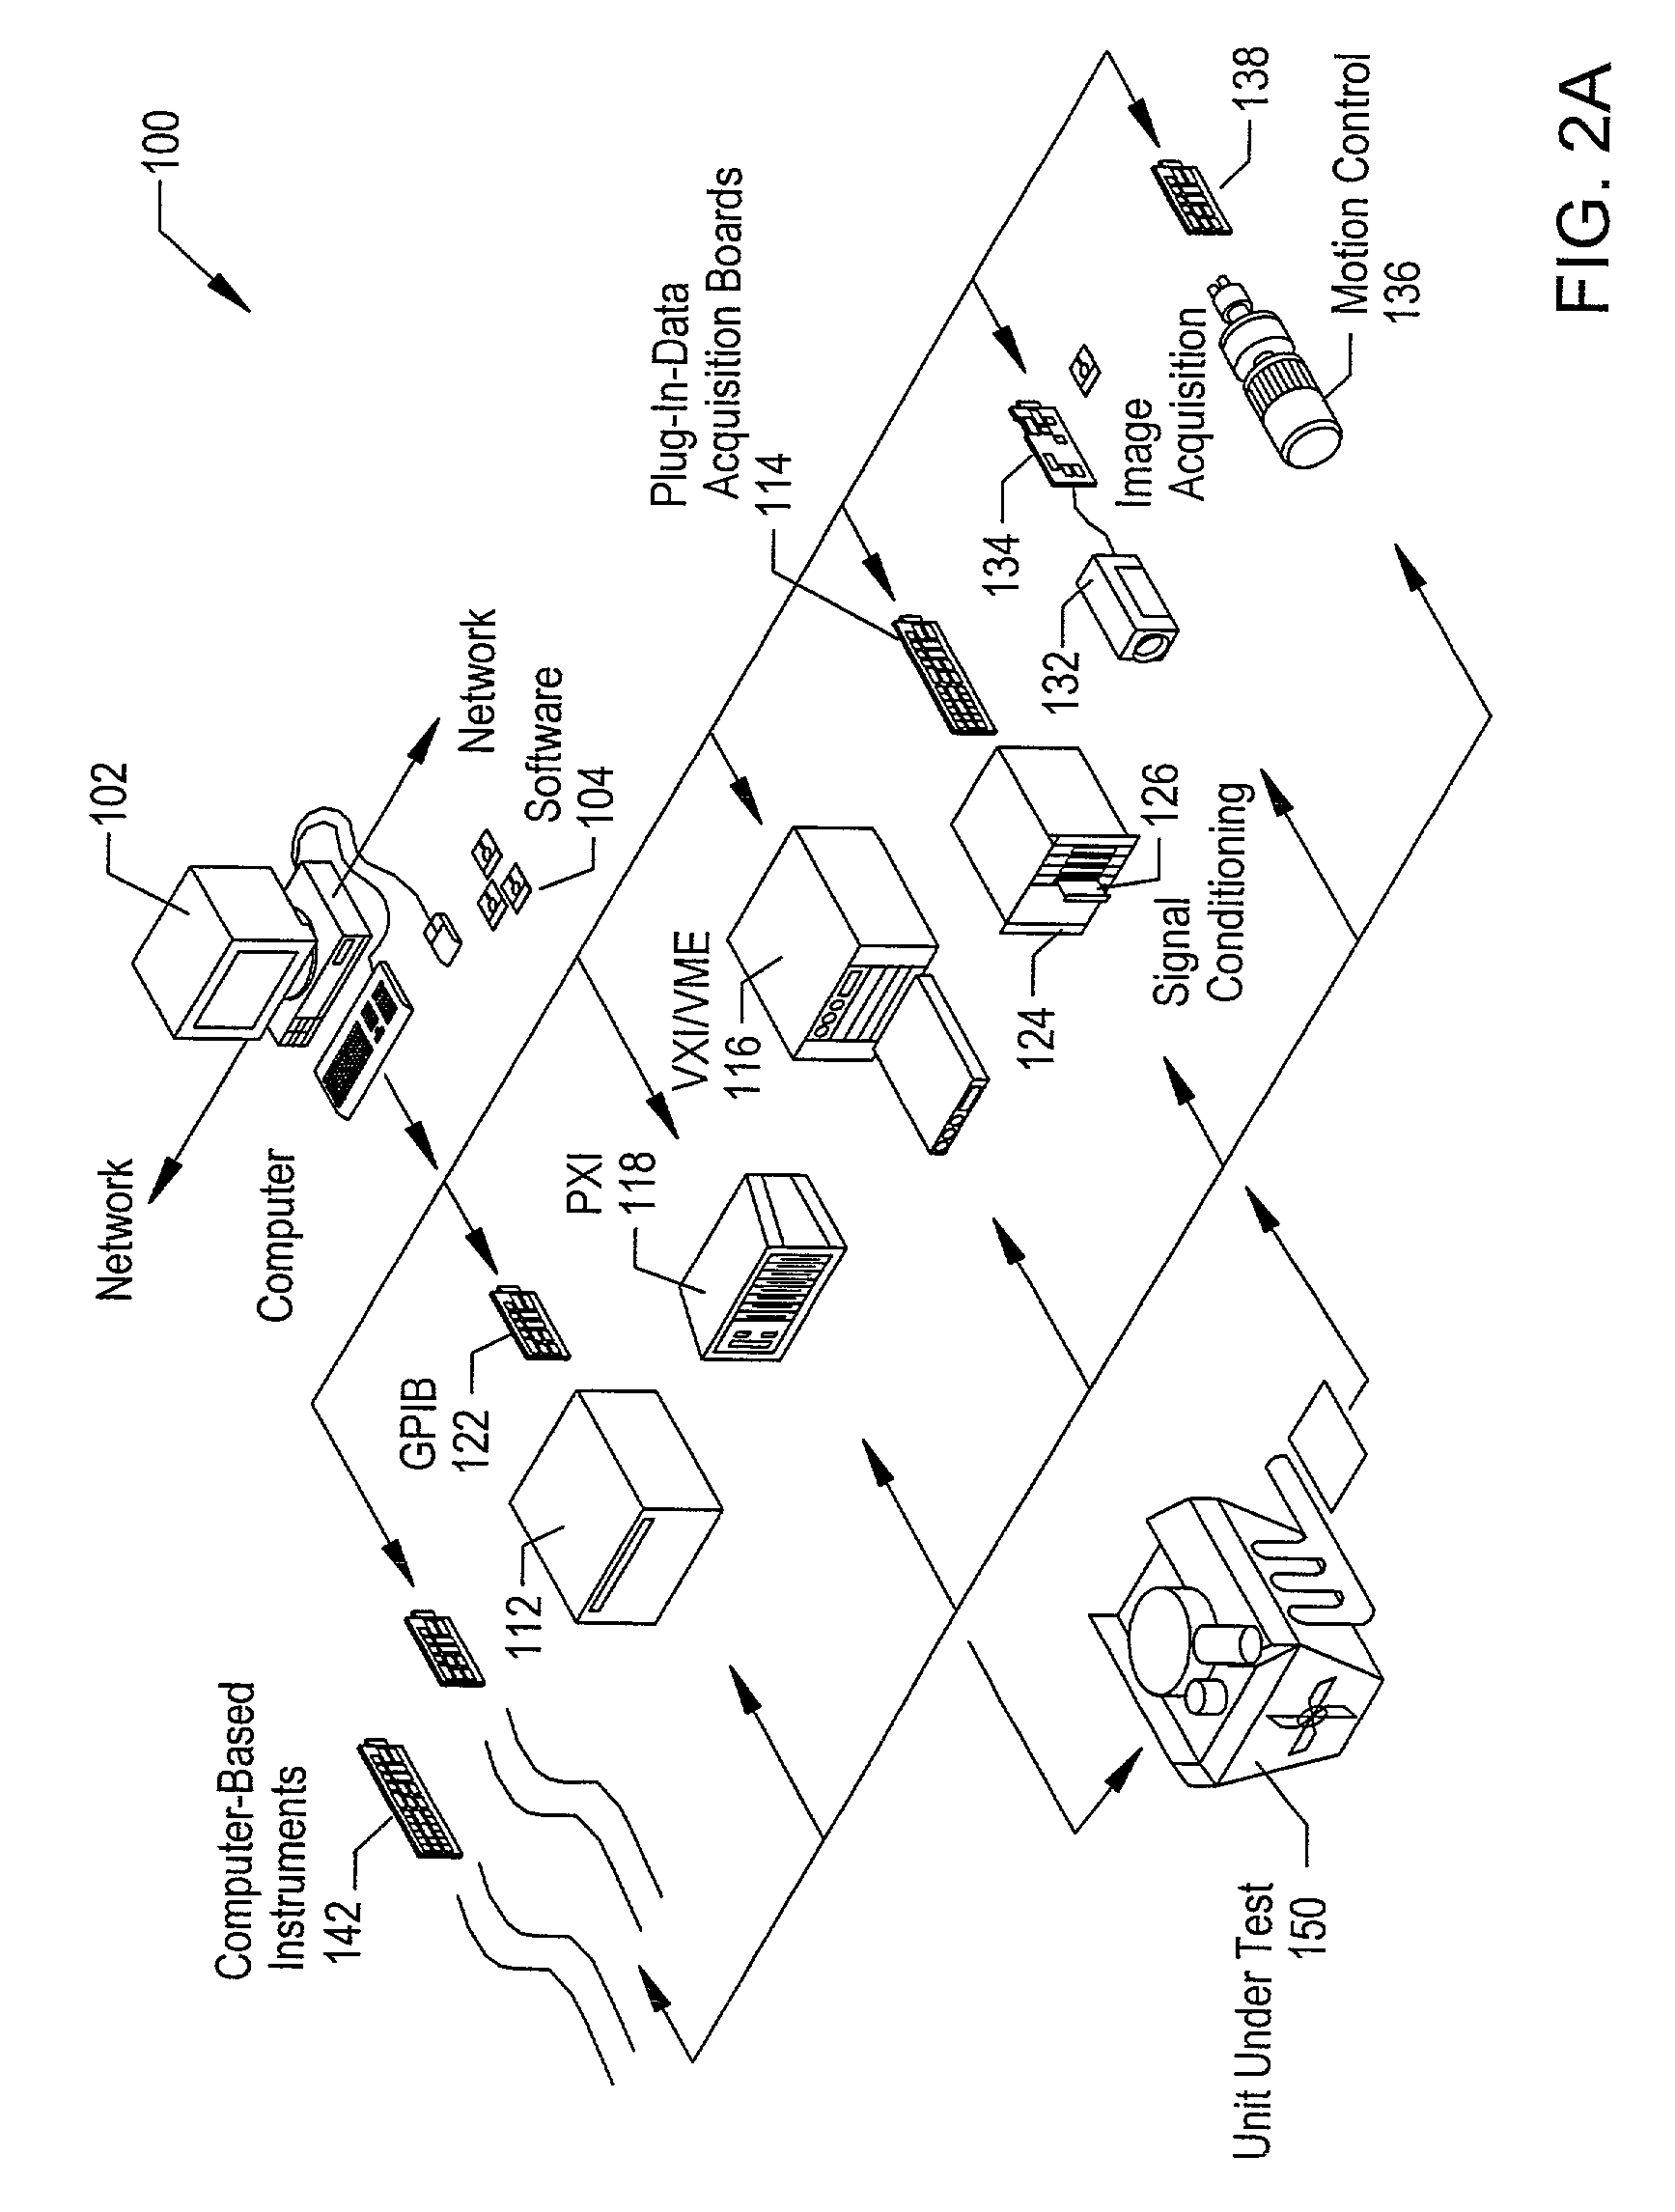 System and method for performing a hardware-in-the-loop simulation using a plurality of graphical programs that share a single graphical user interface